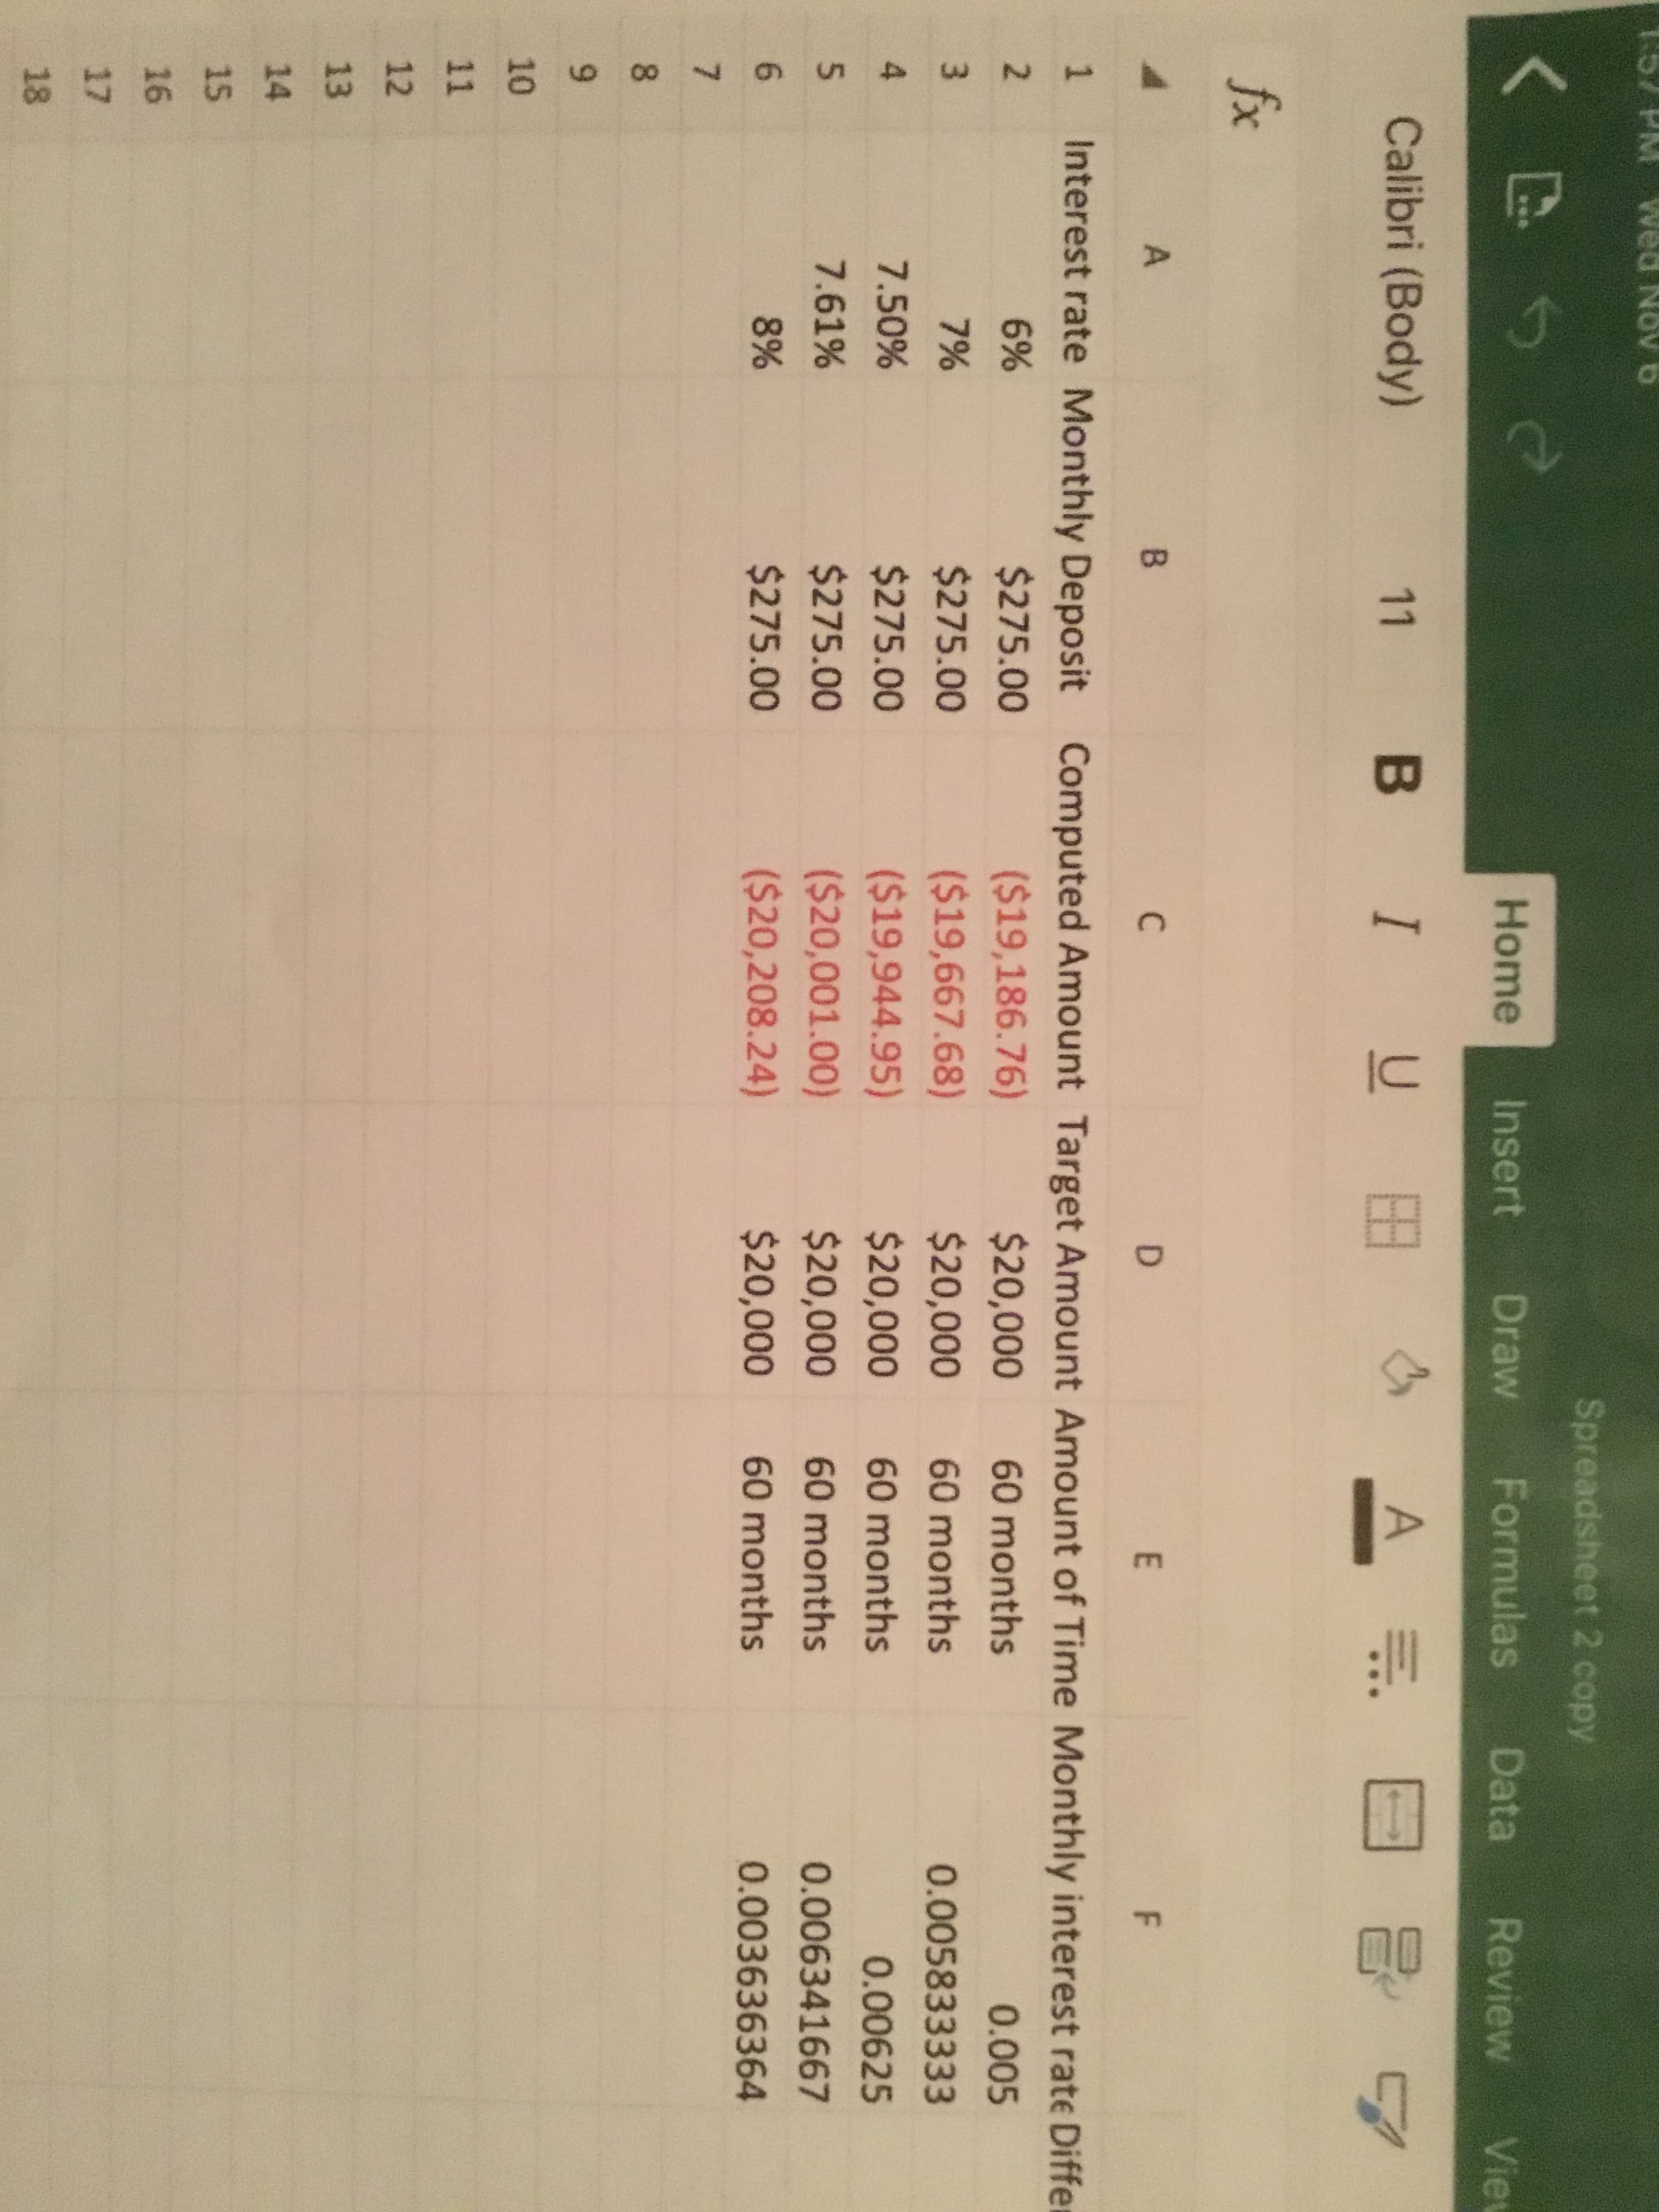 1.67PM Wed Nov 6
Spreadsheet 2 copy
K C
Home
Insert
Draw
Formulas
Data
Review
Vie
Calibri (Body)
B
I U
EB
A
7
11
fx
A
B
C
D
E
F
Interest rate Monthly Deposit
$275.00
Computed Amount Target Amount Amount of Time Monthly interest rate Differ
($19,186.76)
1
2
6%
$20,000
60 months
0.005
$20,000
($19,667.68)
($19,944.95)
($20,001.00)
($20,208.24)
3
7%
$275.00
60 months
0.005833333
4
7.50%
$275.00
$20,000
60 months
0.00625
$20,000
$20,000
7.61%
$275.00
60 months
0.006341667
6
8%
$275.00
60 months
0.003636364
7
8
9
10
11
12
13
14
15
16
17
18
